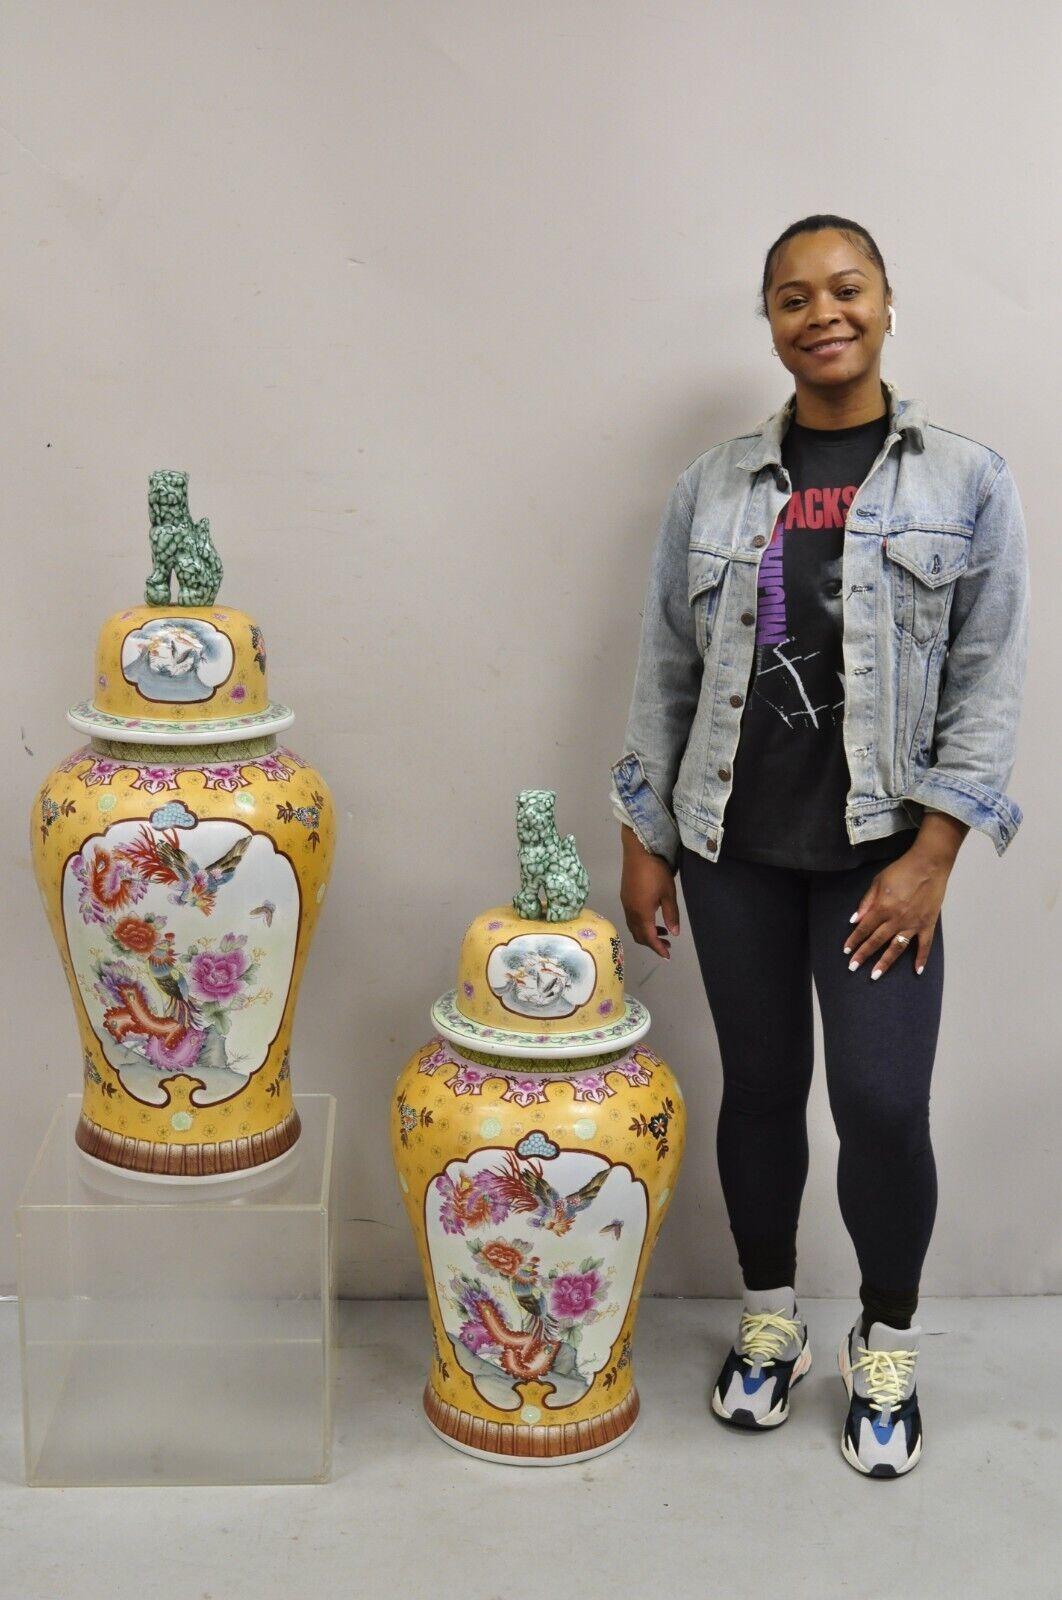 Vintage Chinese Porcelain Large Foo Dog Covered Temple Jar Ginger Jars - a Pair. Item features Bird, butterfly, and floral decoration on both sides, lid with green foo dog handle, large impressive size. Circa ex Late 20th Century. Measurements: 36